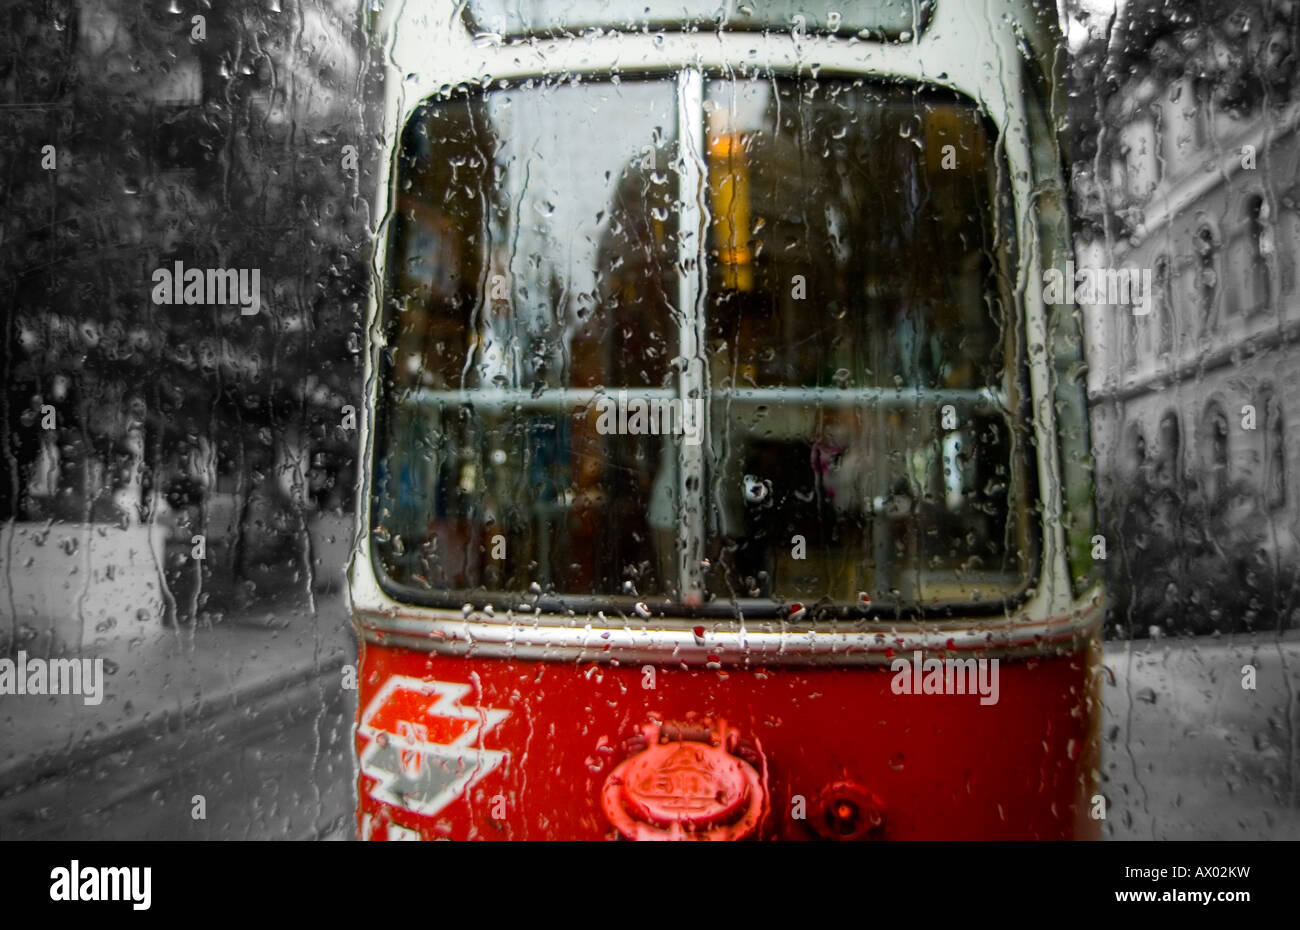 A tram traveling through a tree-lined street on a rainy day in Vienna, Austria. Stock Photo